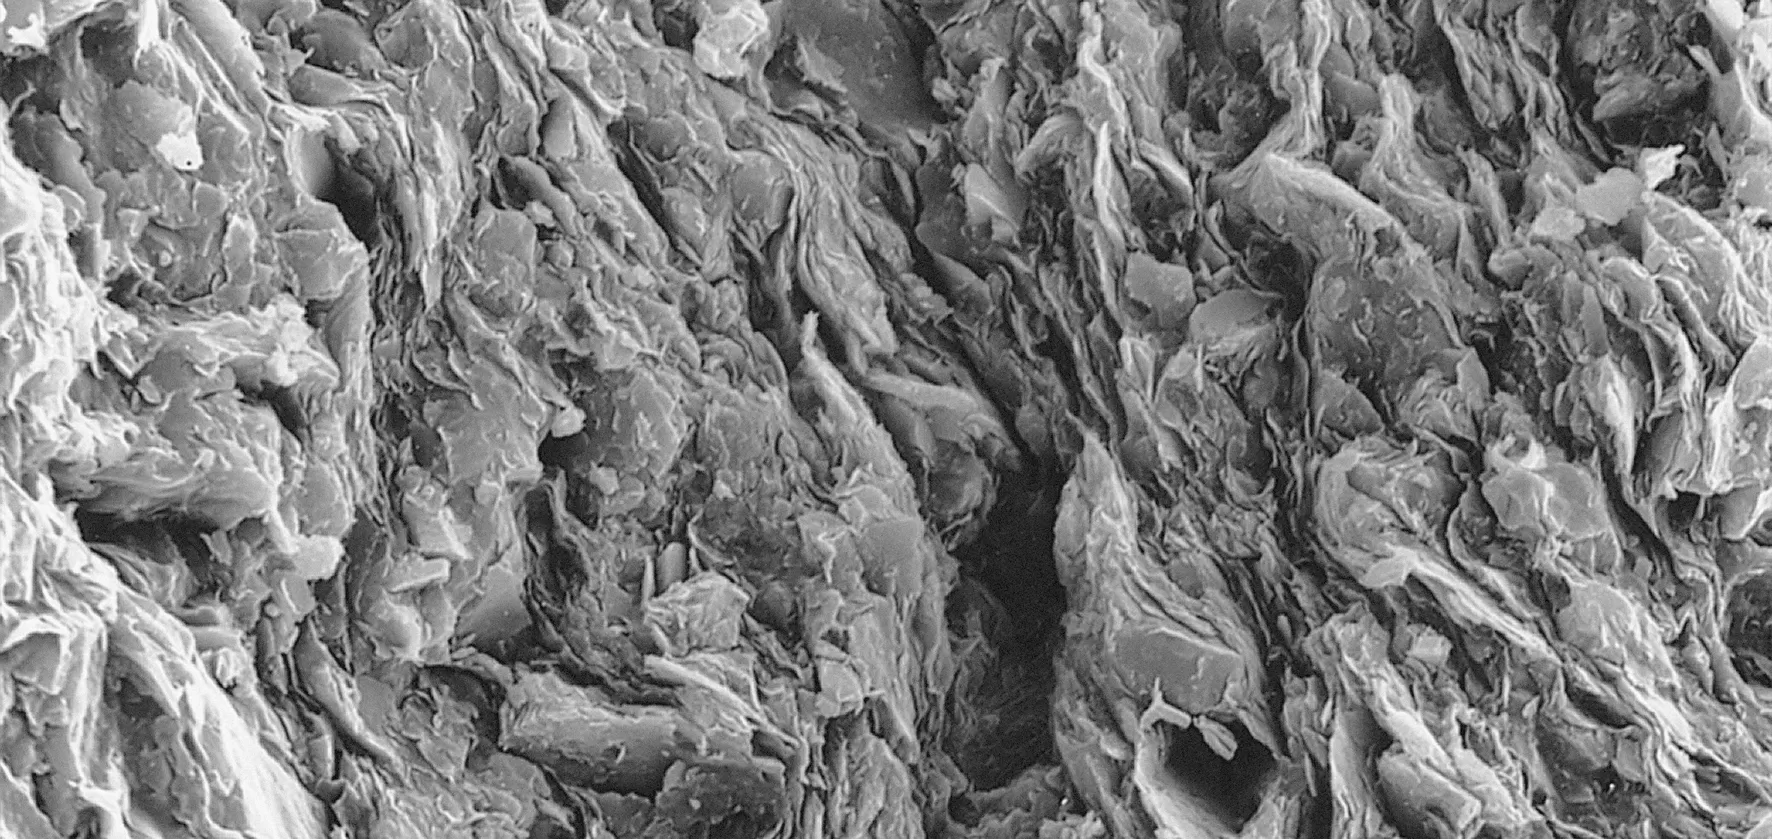 Opalinus Clay under the scanning electron microscope: one gram of Opalinus Clay has a surface area of approximately 100 square metres. This is roughly equivalent to the size of a badminton court (photo width around 0.05 mm).